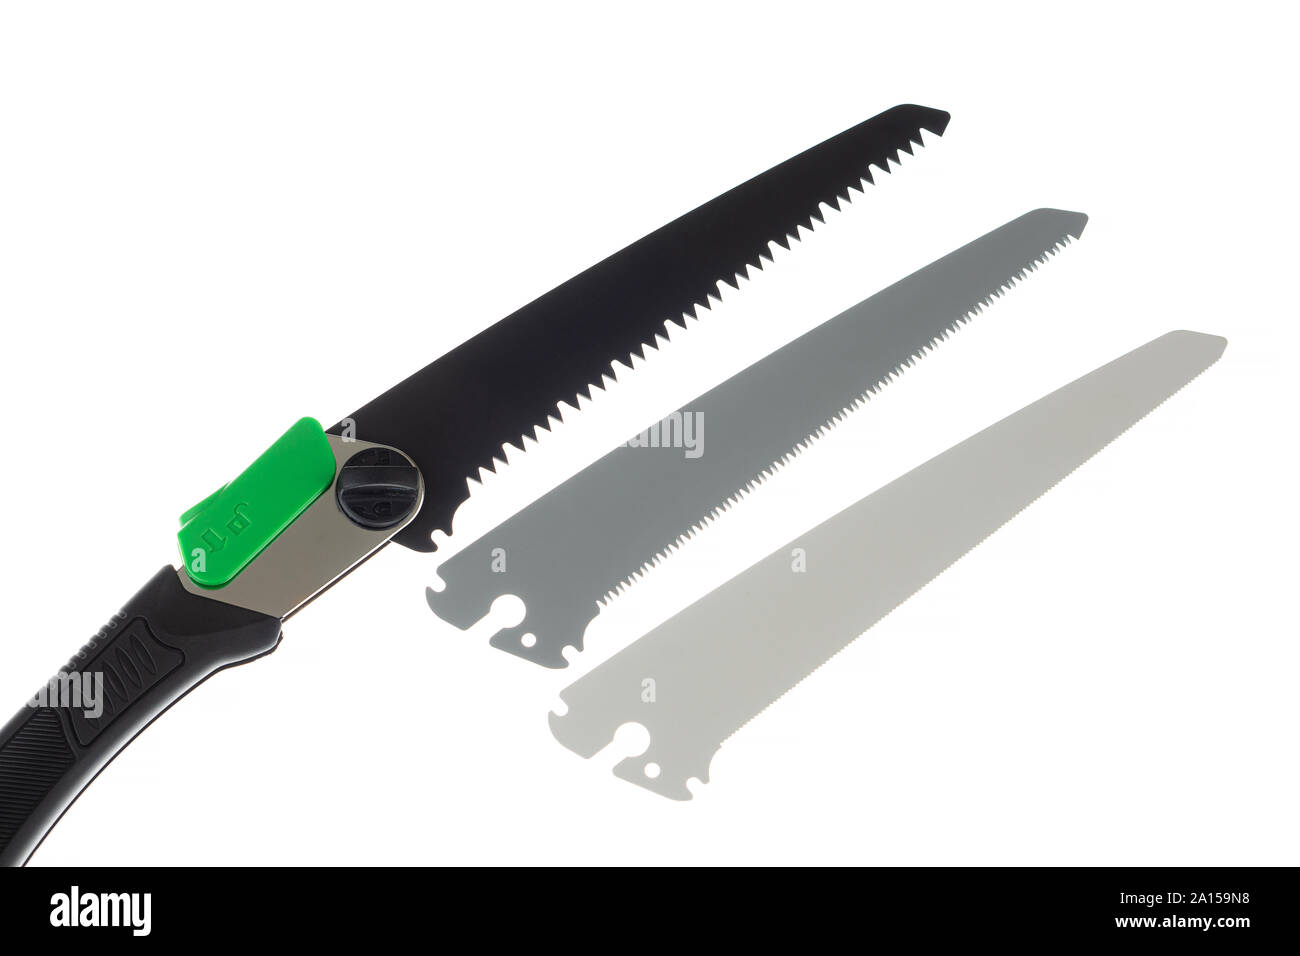 Folding handsaw and replaceable blades isolated on white Stock Photo